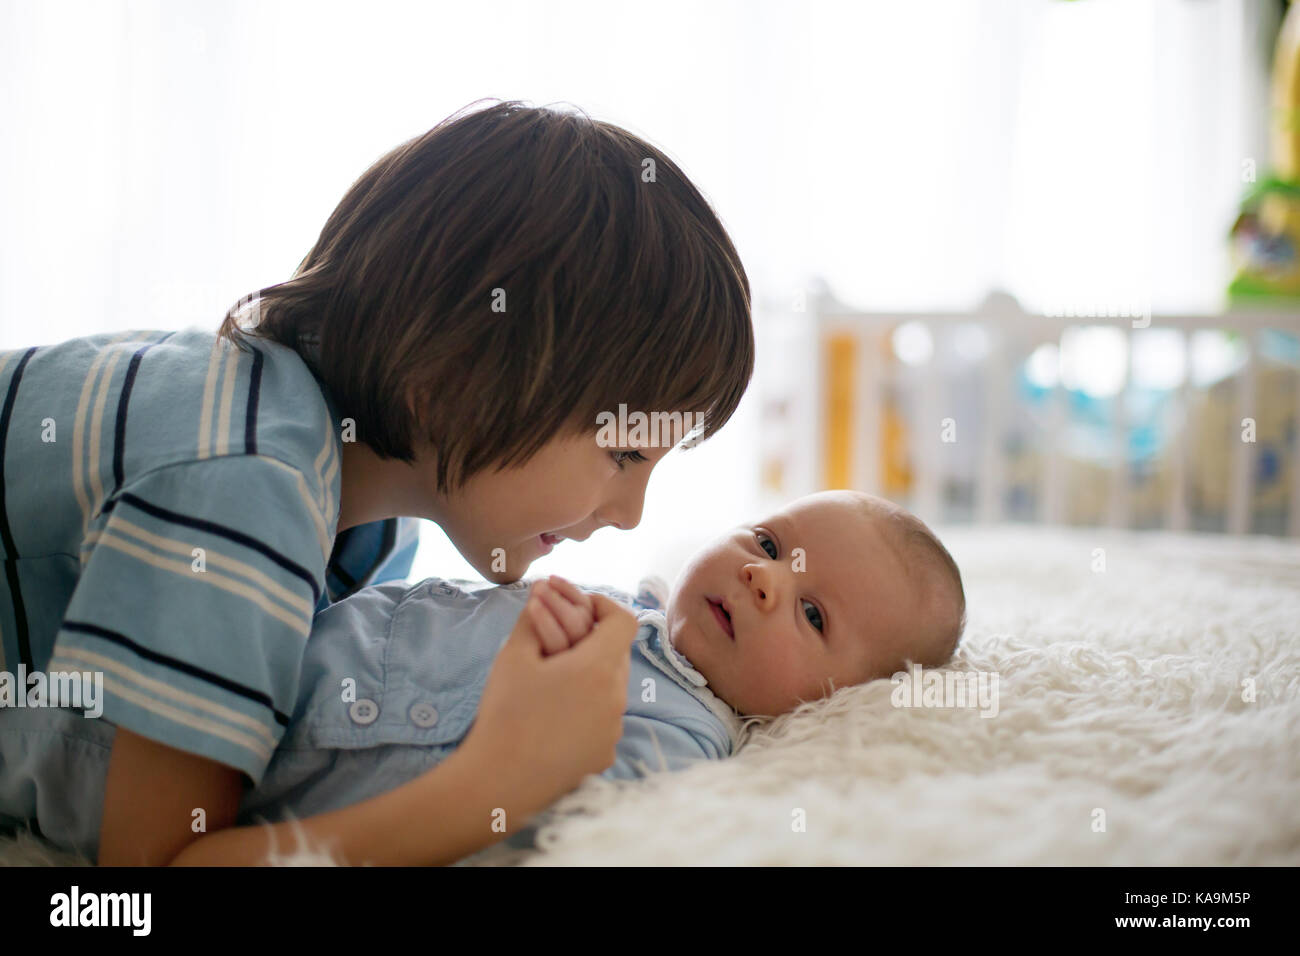 Beautiful boy, hugging with tenderness and care his newborn baby brother at home. Family love happiness concept Stock Photo